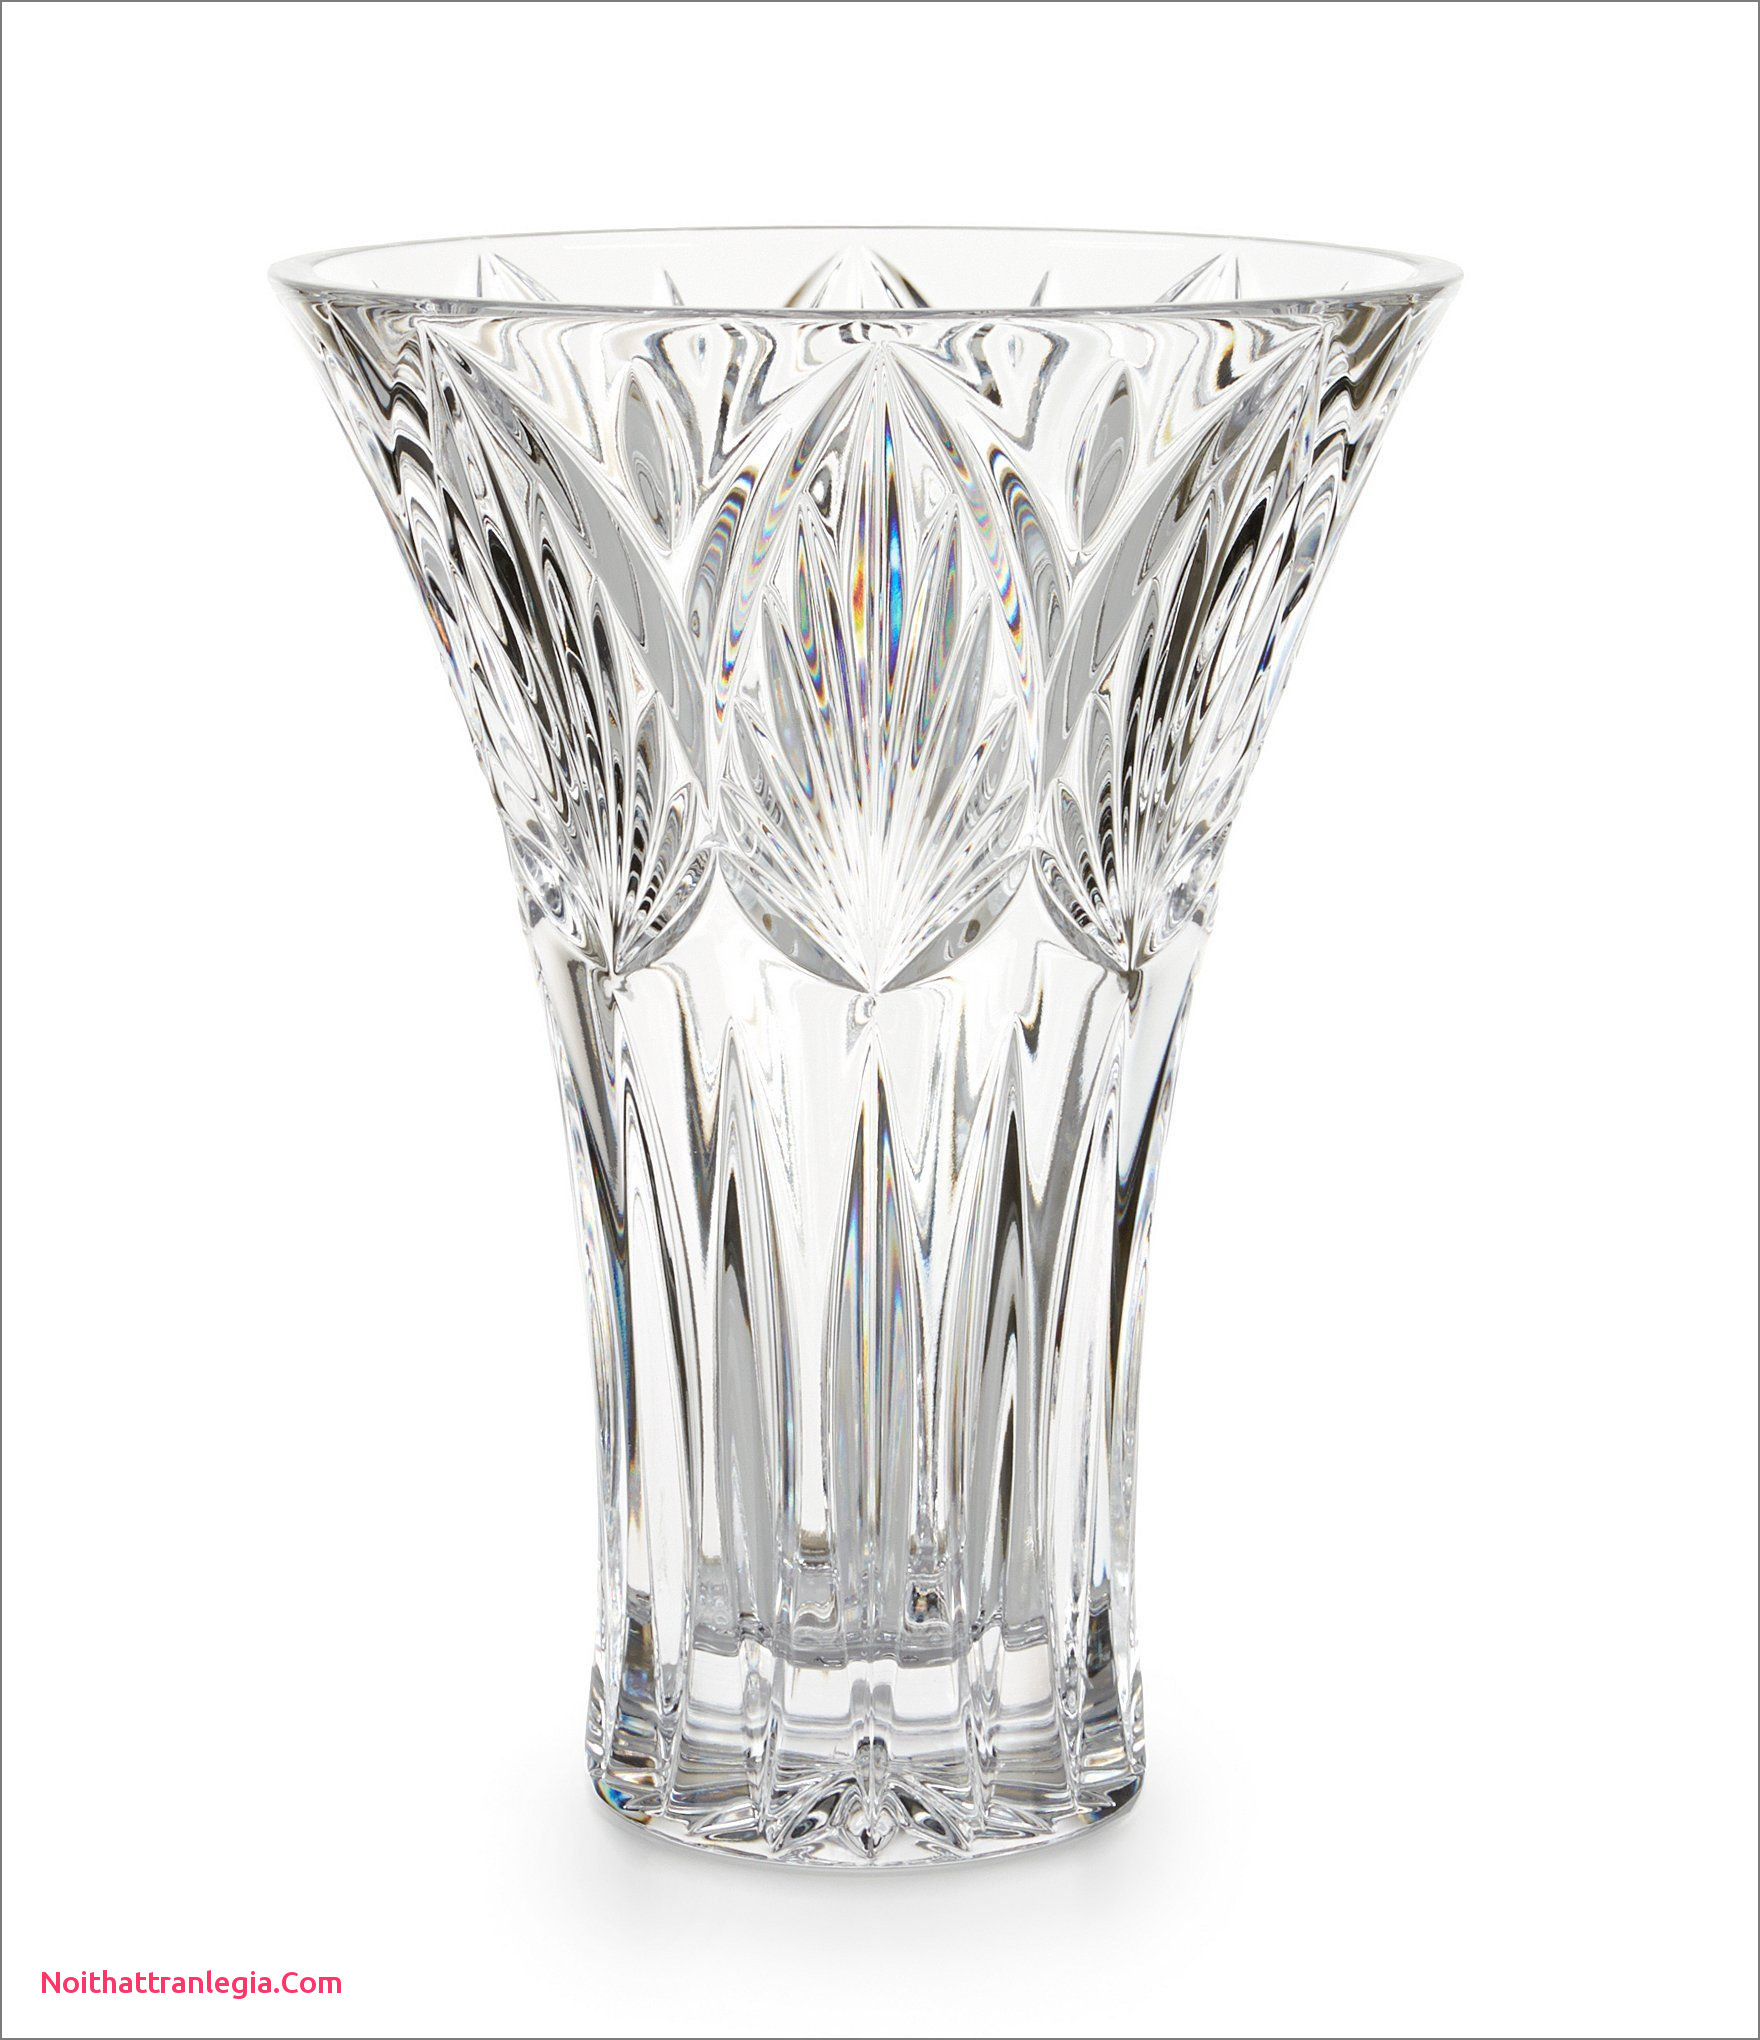 12 Cute wholesale Martini Glass Vases Centerpieces 2024 free download wholesale martini glass vases centerpieces of 20 large waterford crystal vase noithattranlegia vases design within large waterford crystal vase best of waterford westbridge crystal vase of l